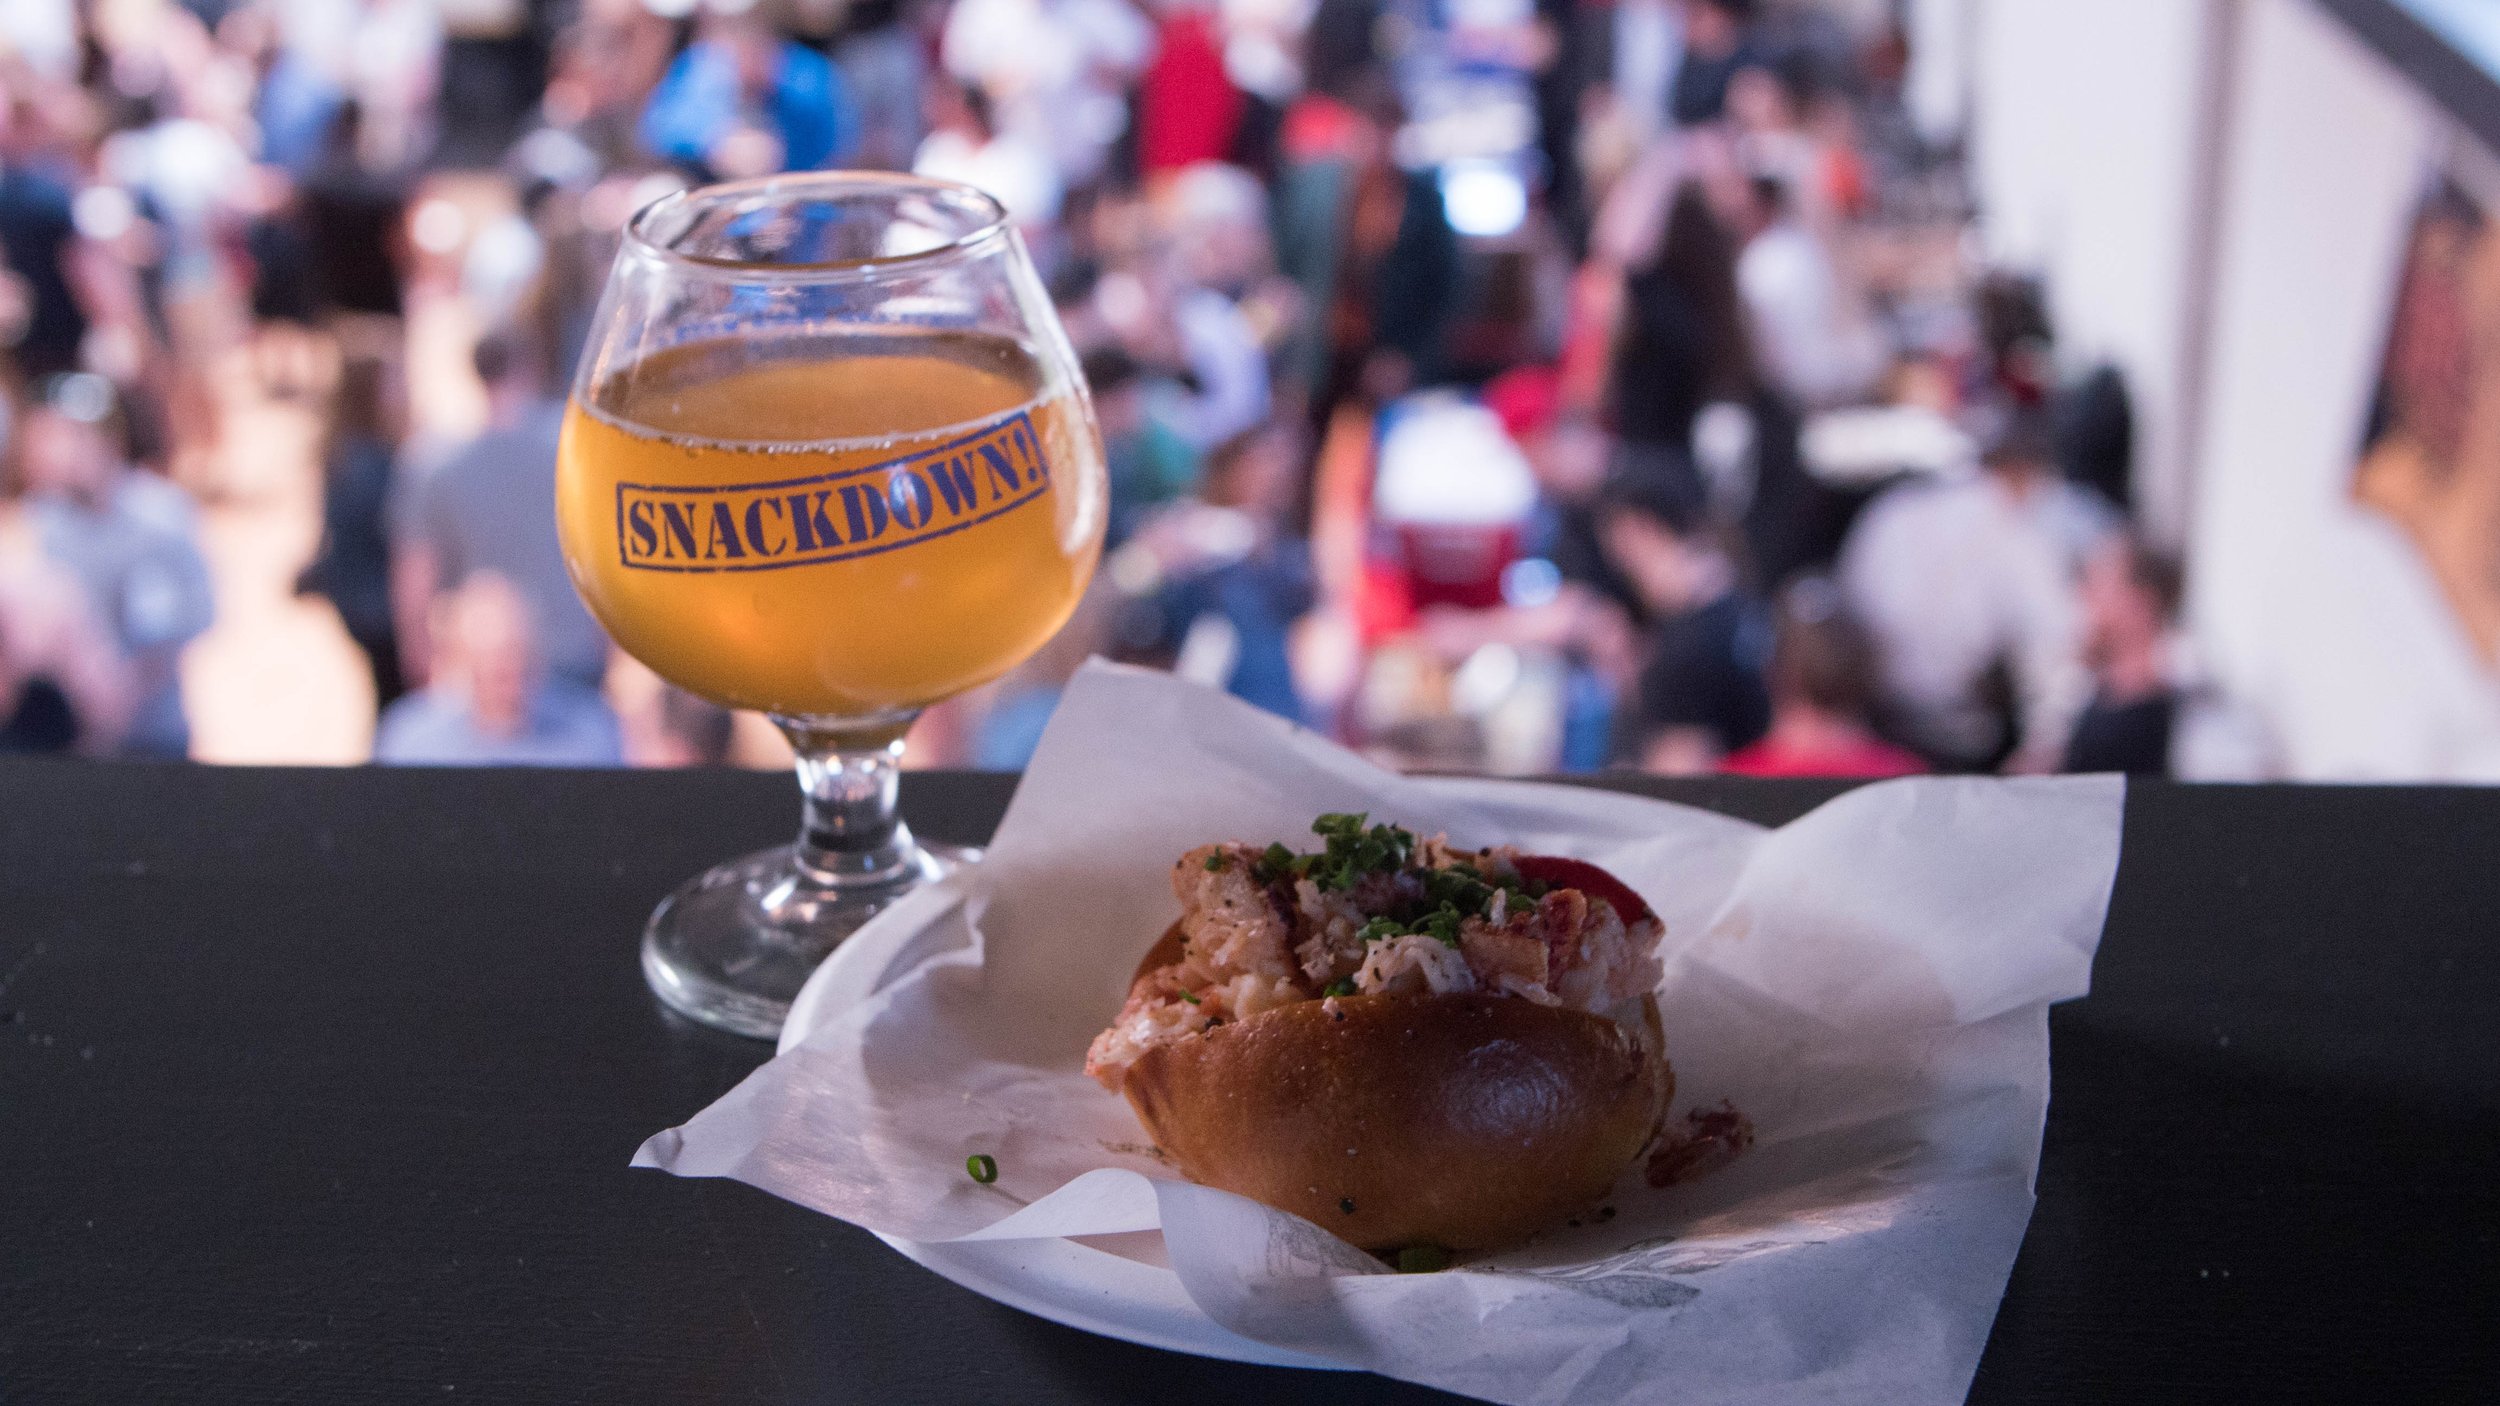 A Belgian beer glass sits next to a small lobster roll with a crowd in the background.